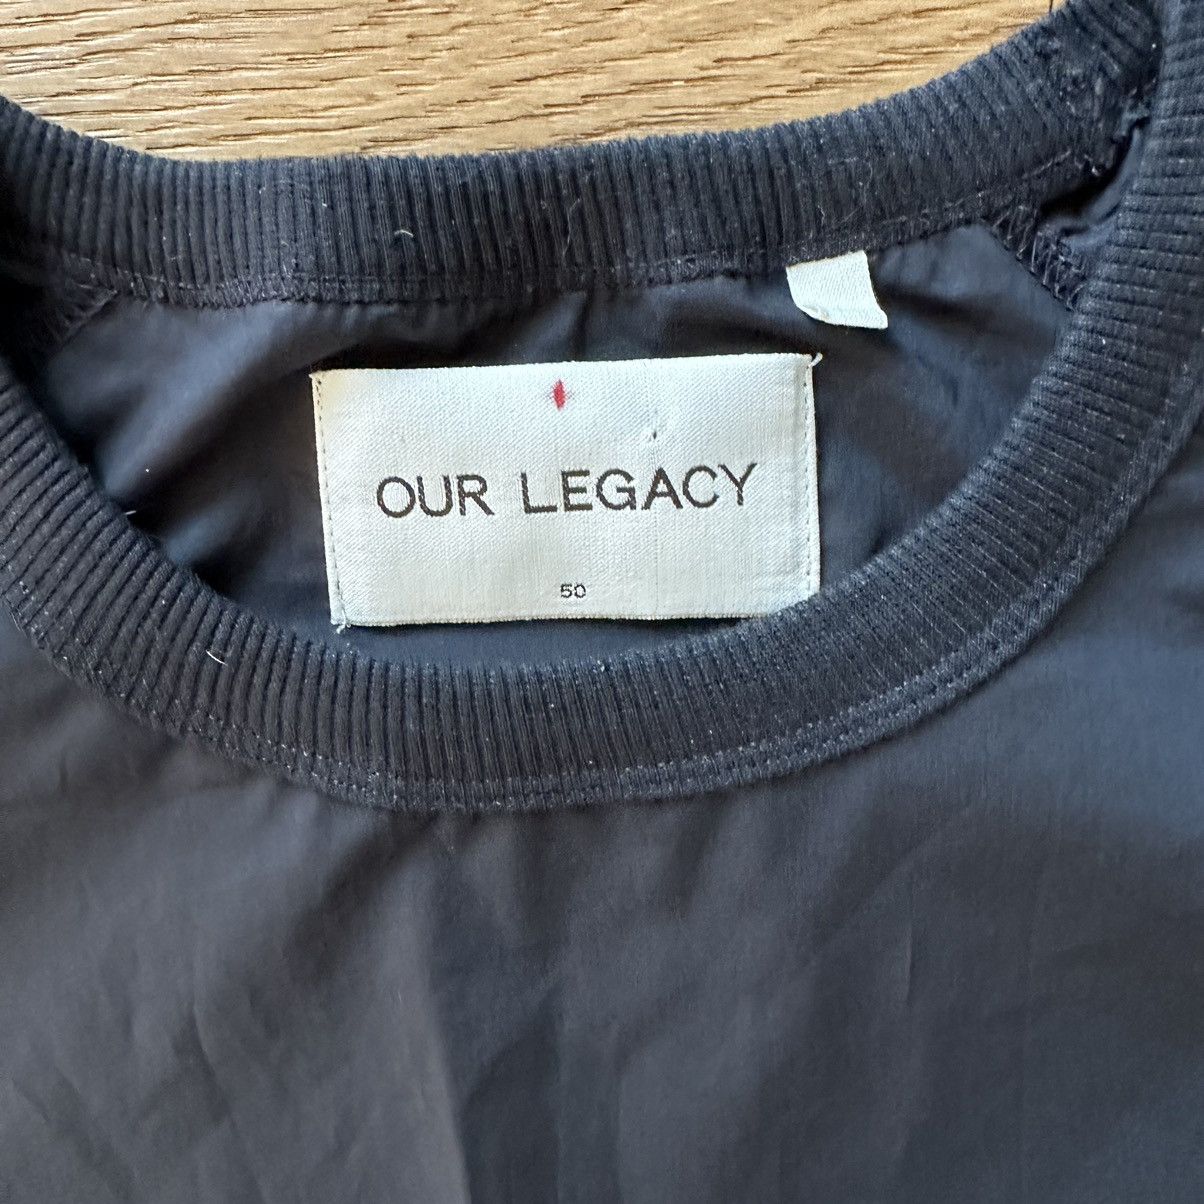 Our Legacy Our Legacy SS15 Navy Crewneck Size US M / EU 48-50 / 2 - 2 Preview